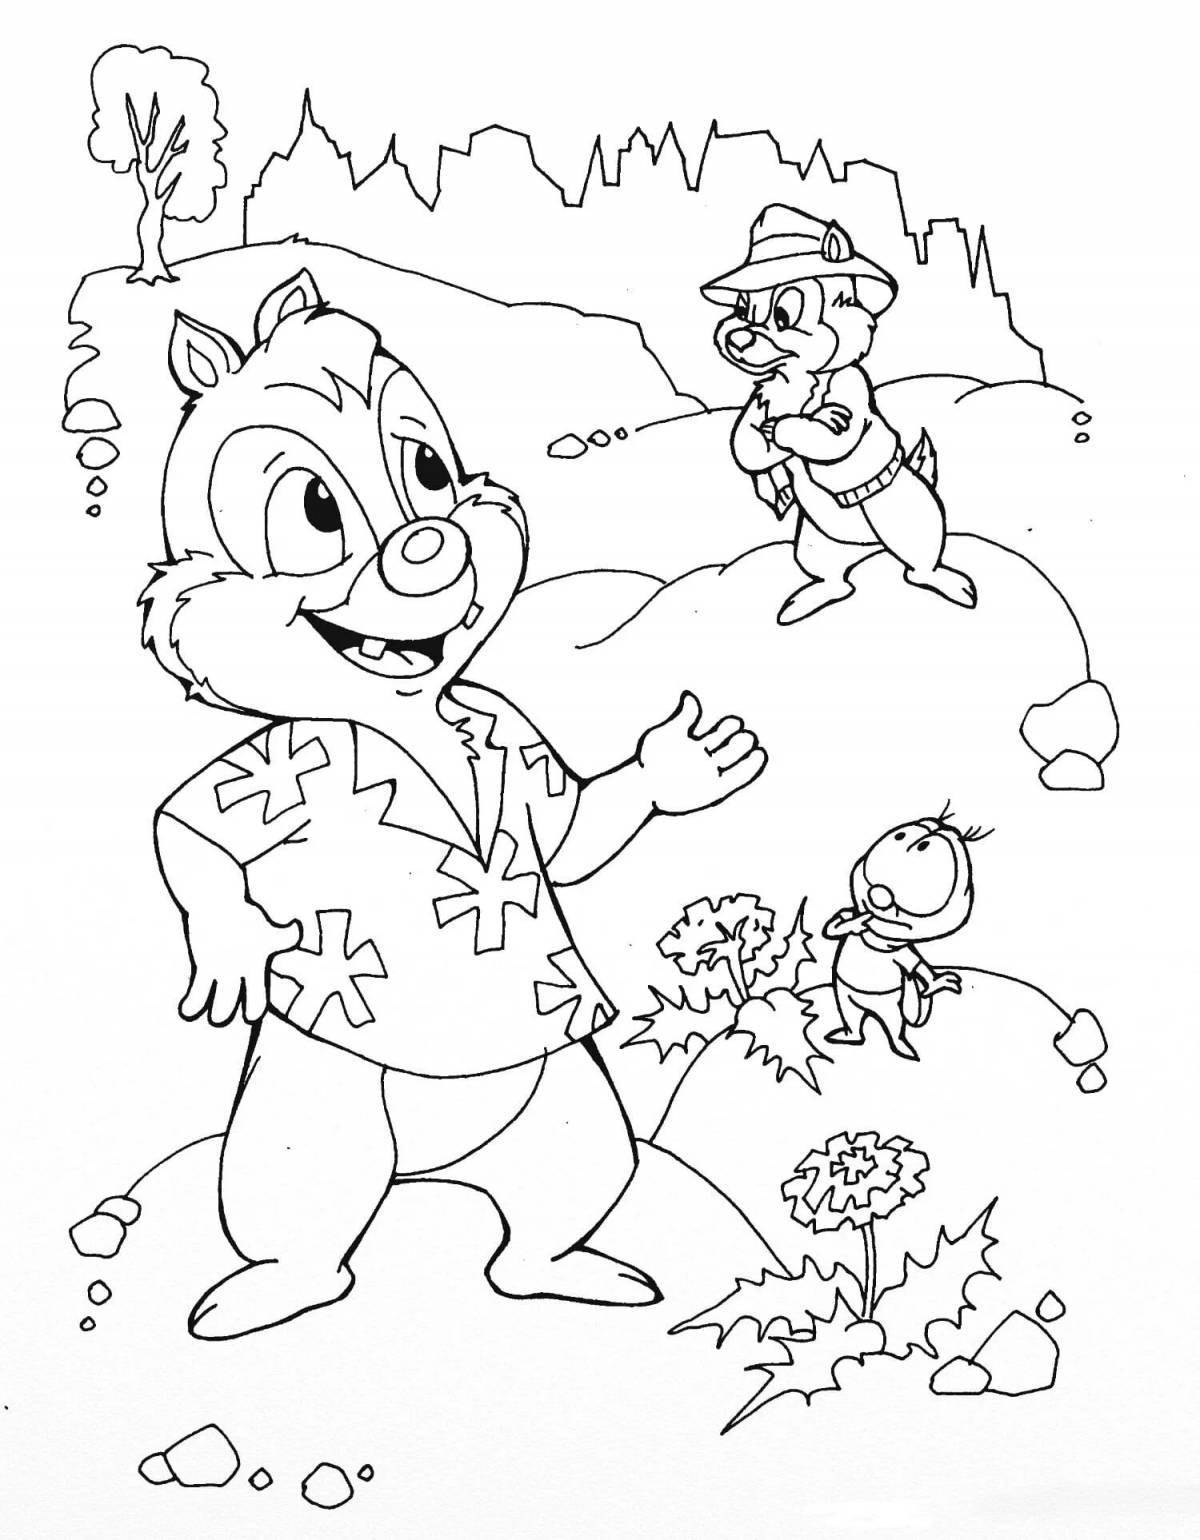 Exciting selection of coloring pages